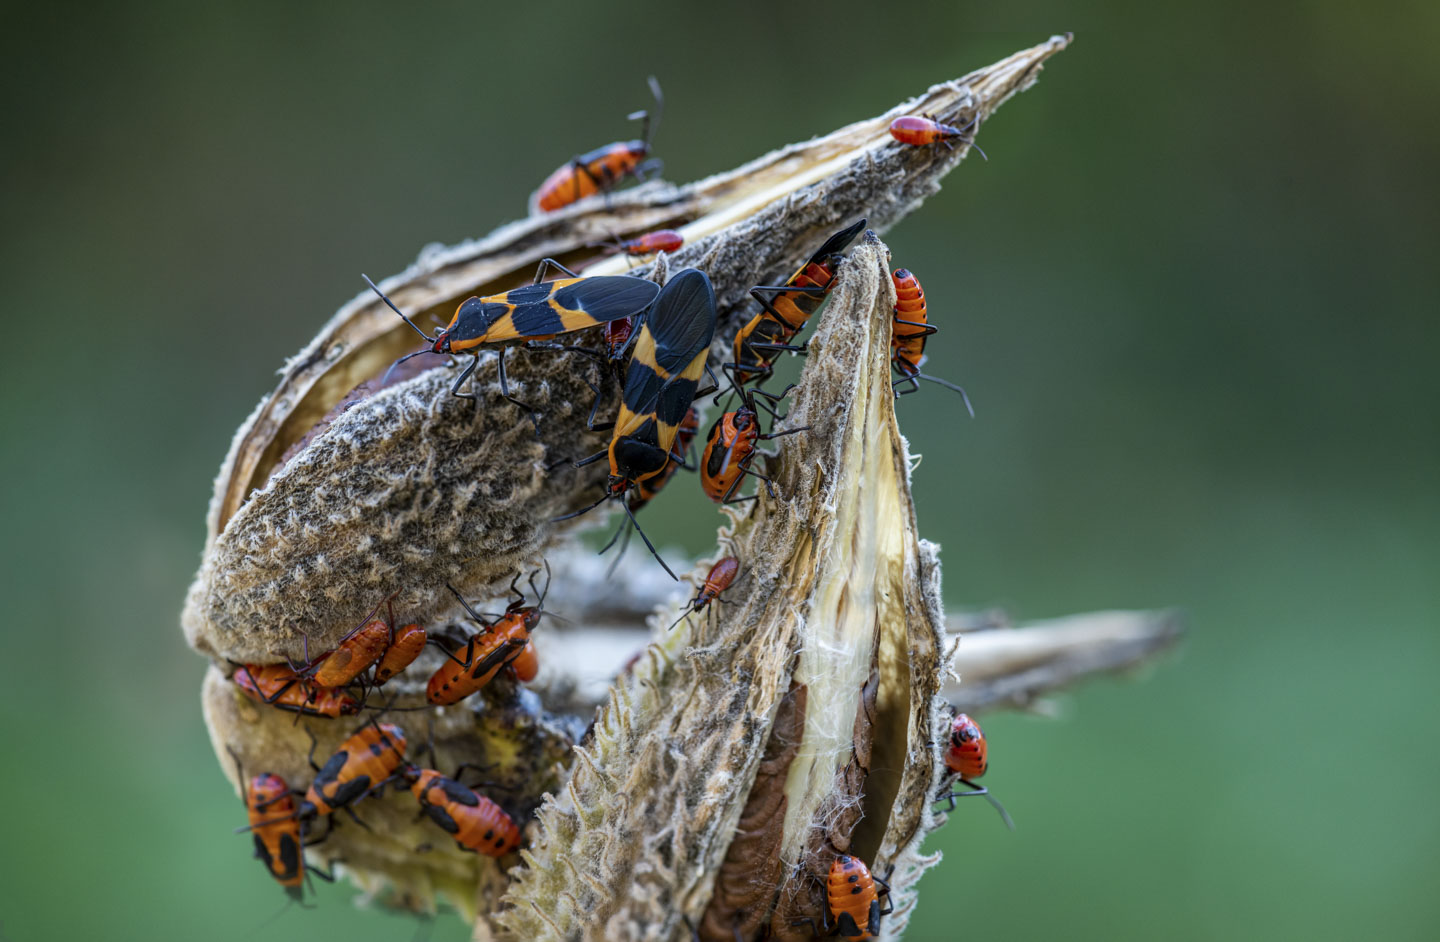 Milkweed pods with many insects on them